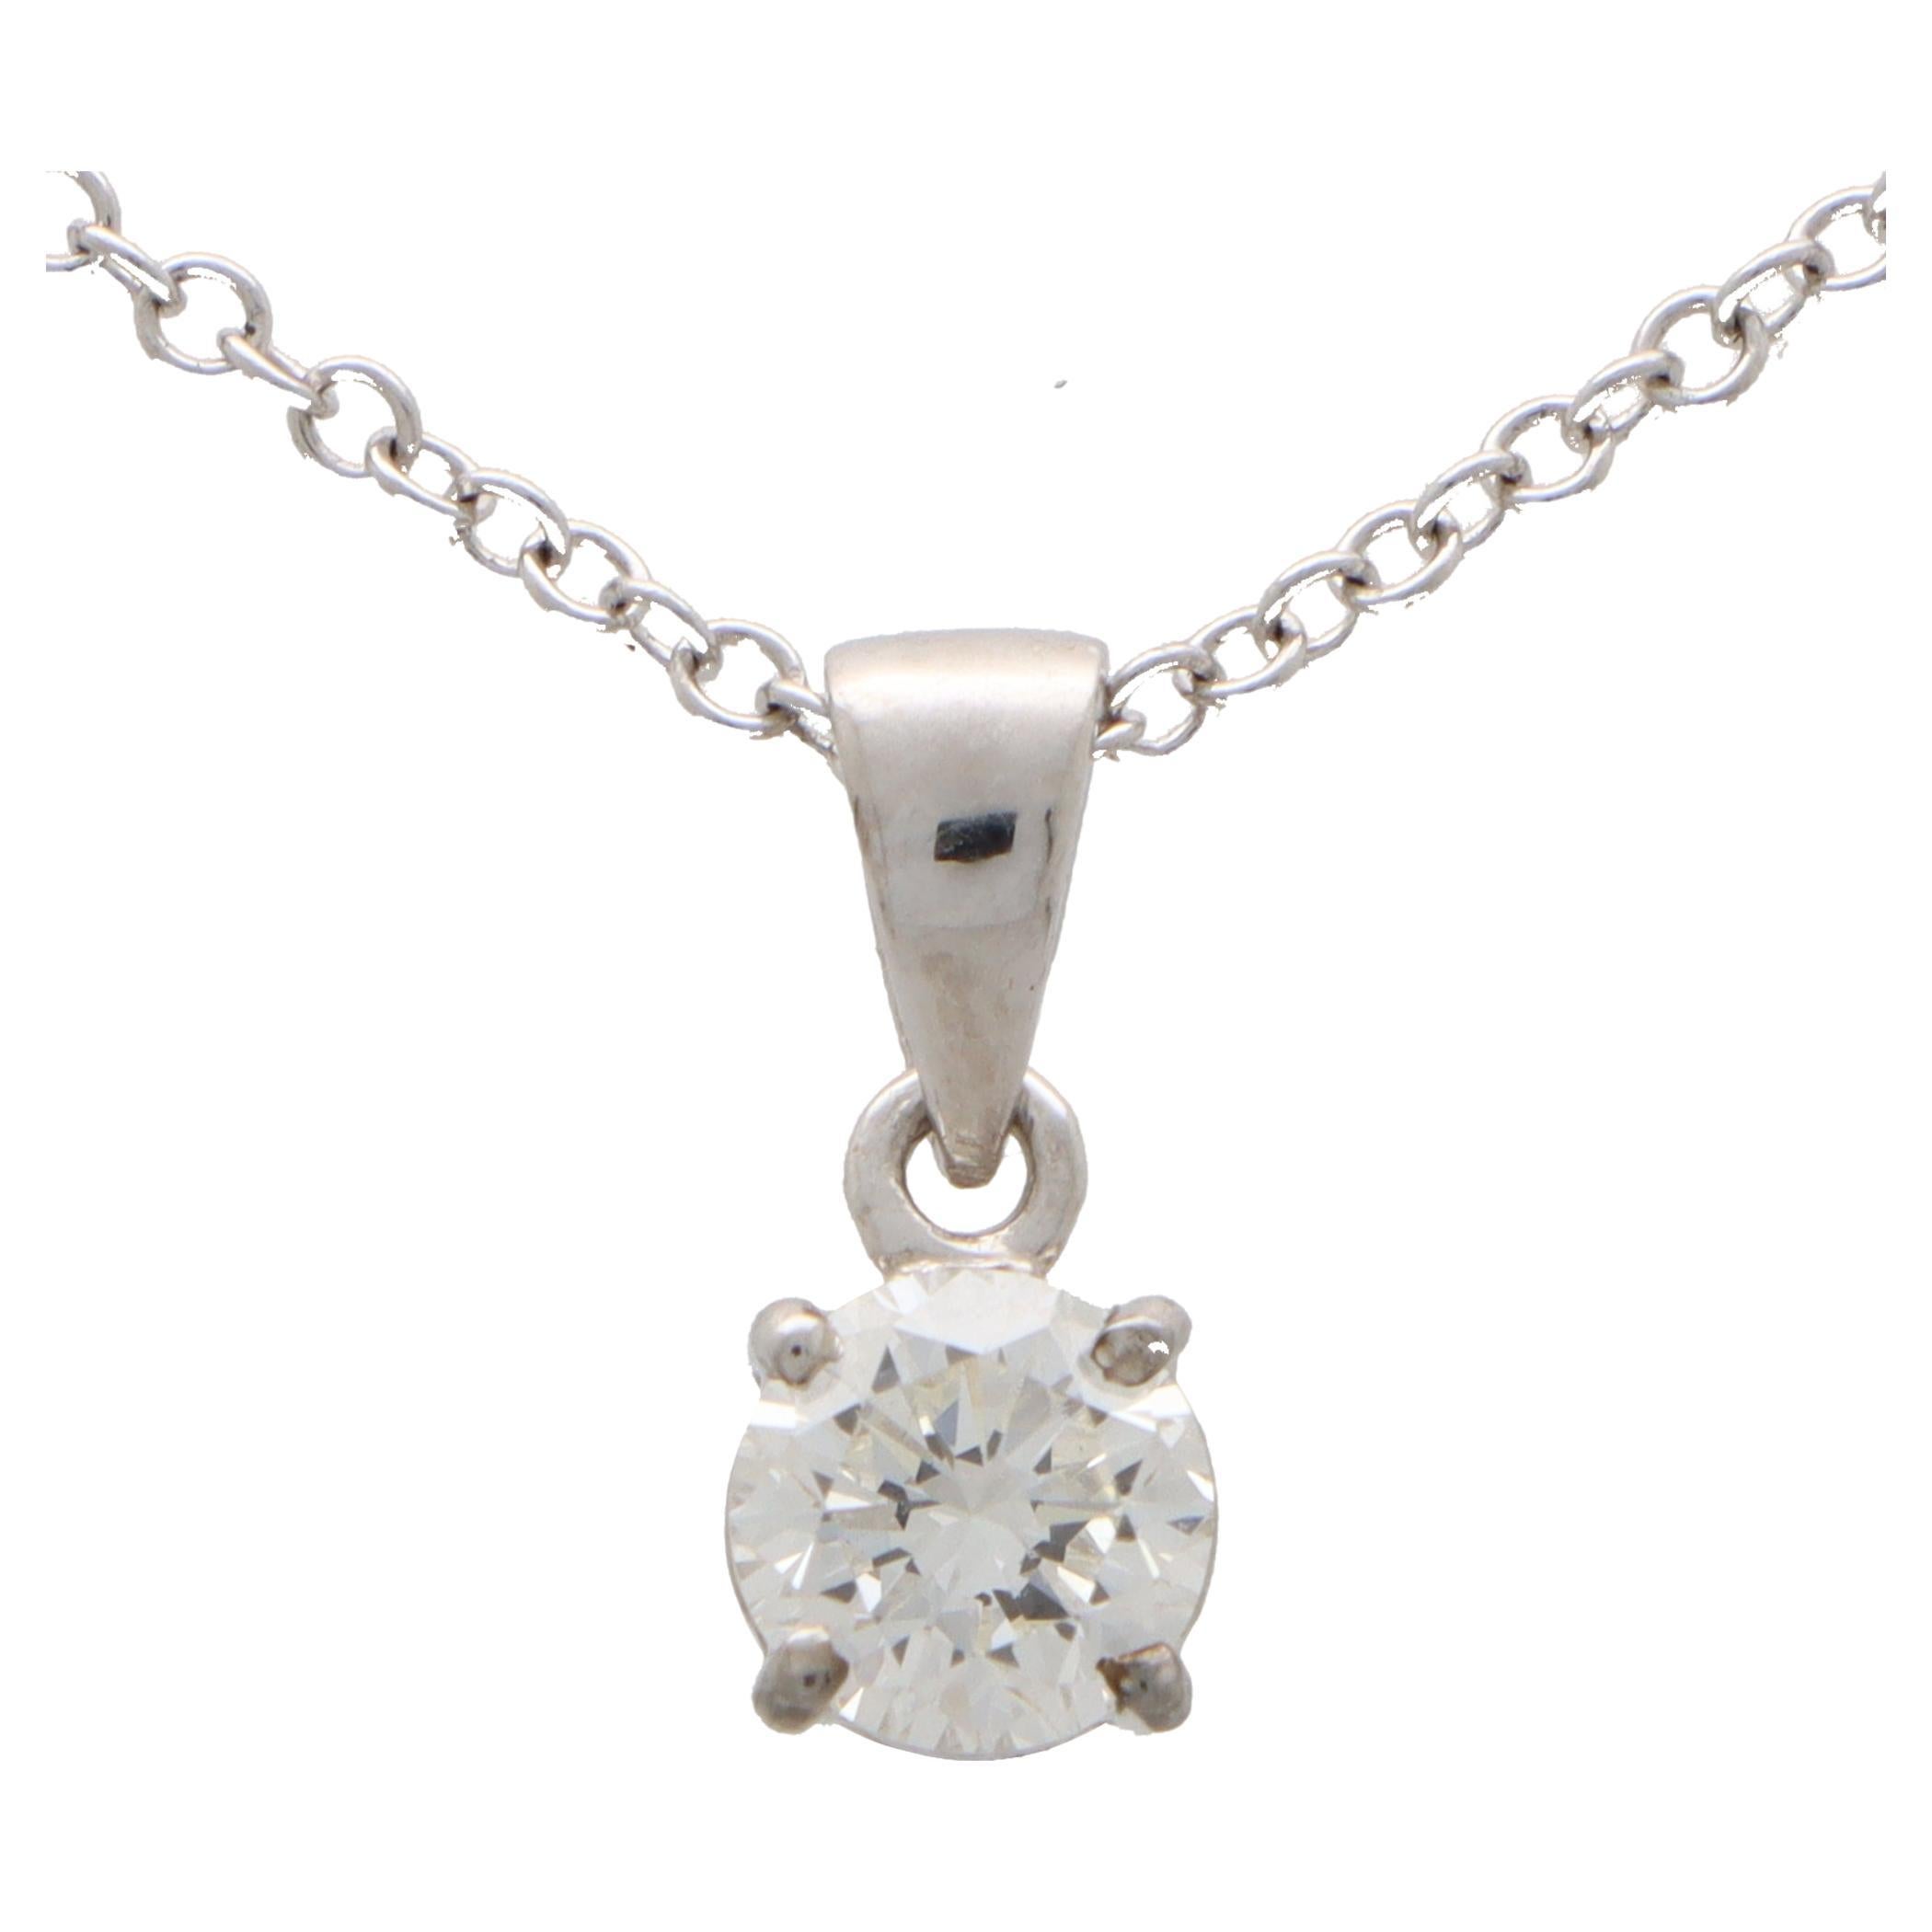  Vintage 0.50ct Single Solitaire Diamond Pendant Necklace Set in 18k White Gold For Sale